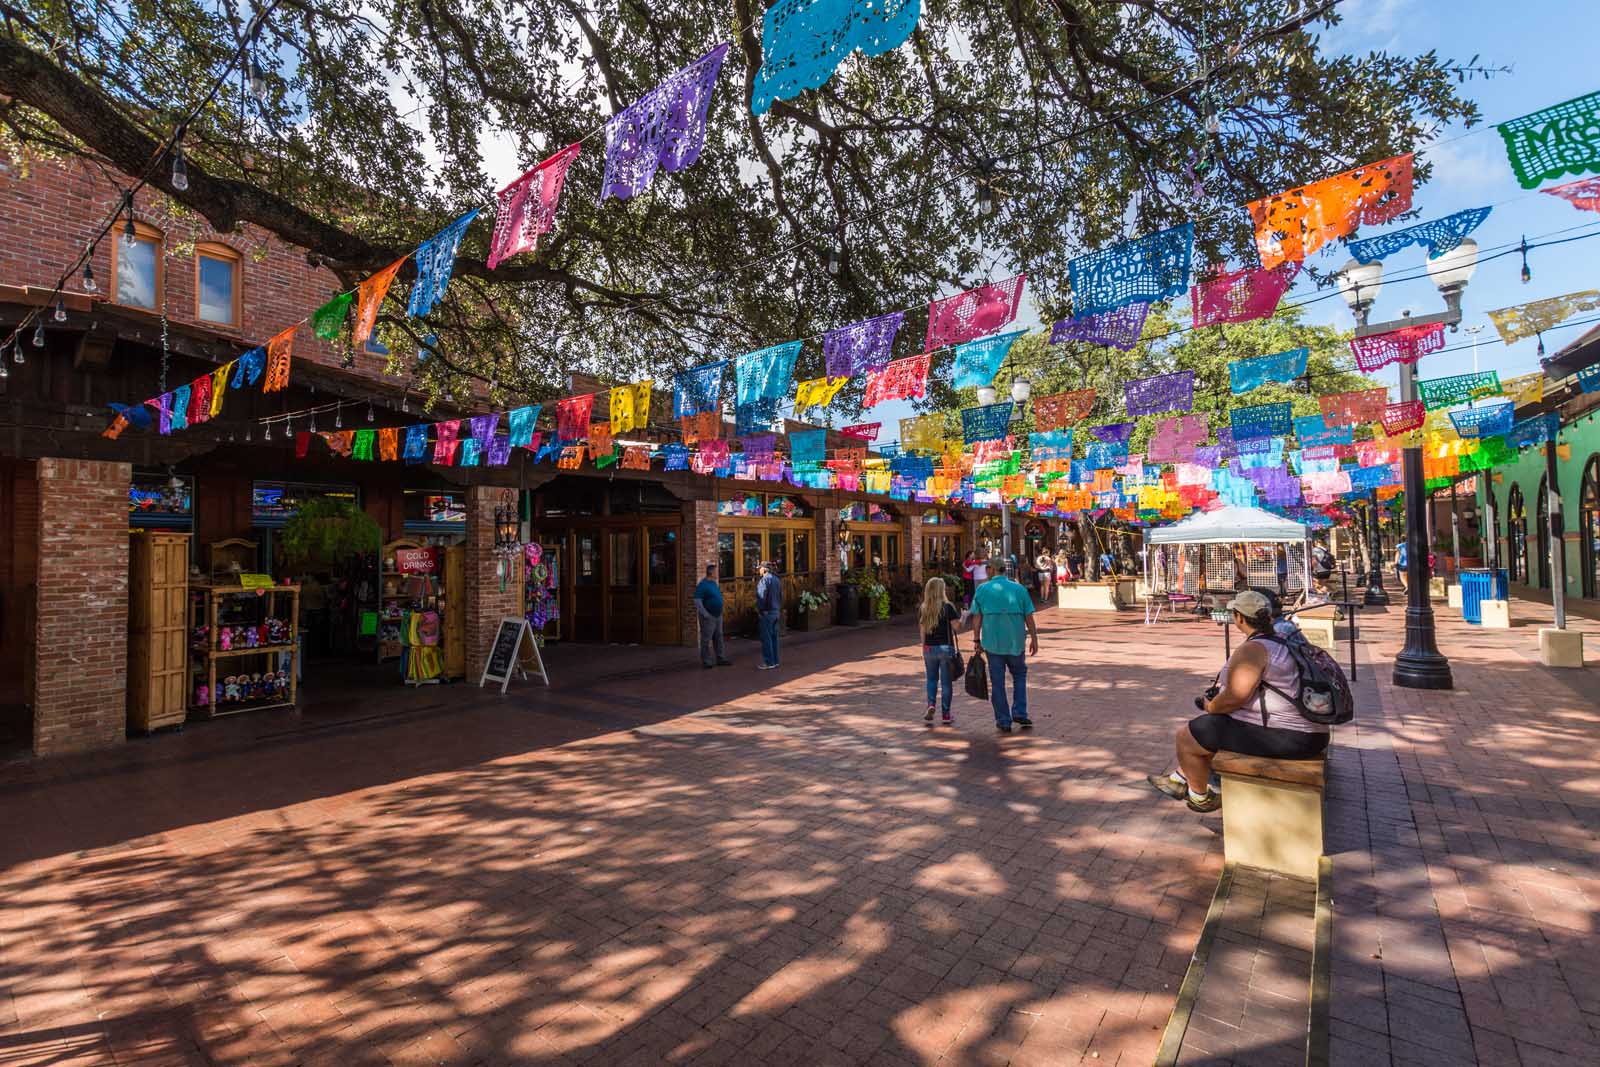 Things to do in San Antonio TX Historic Market Square